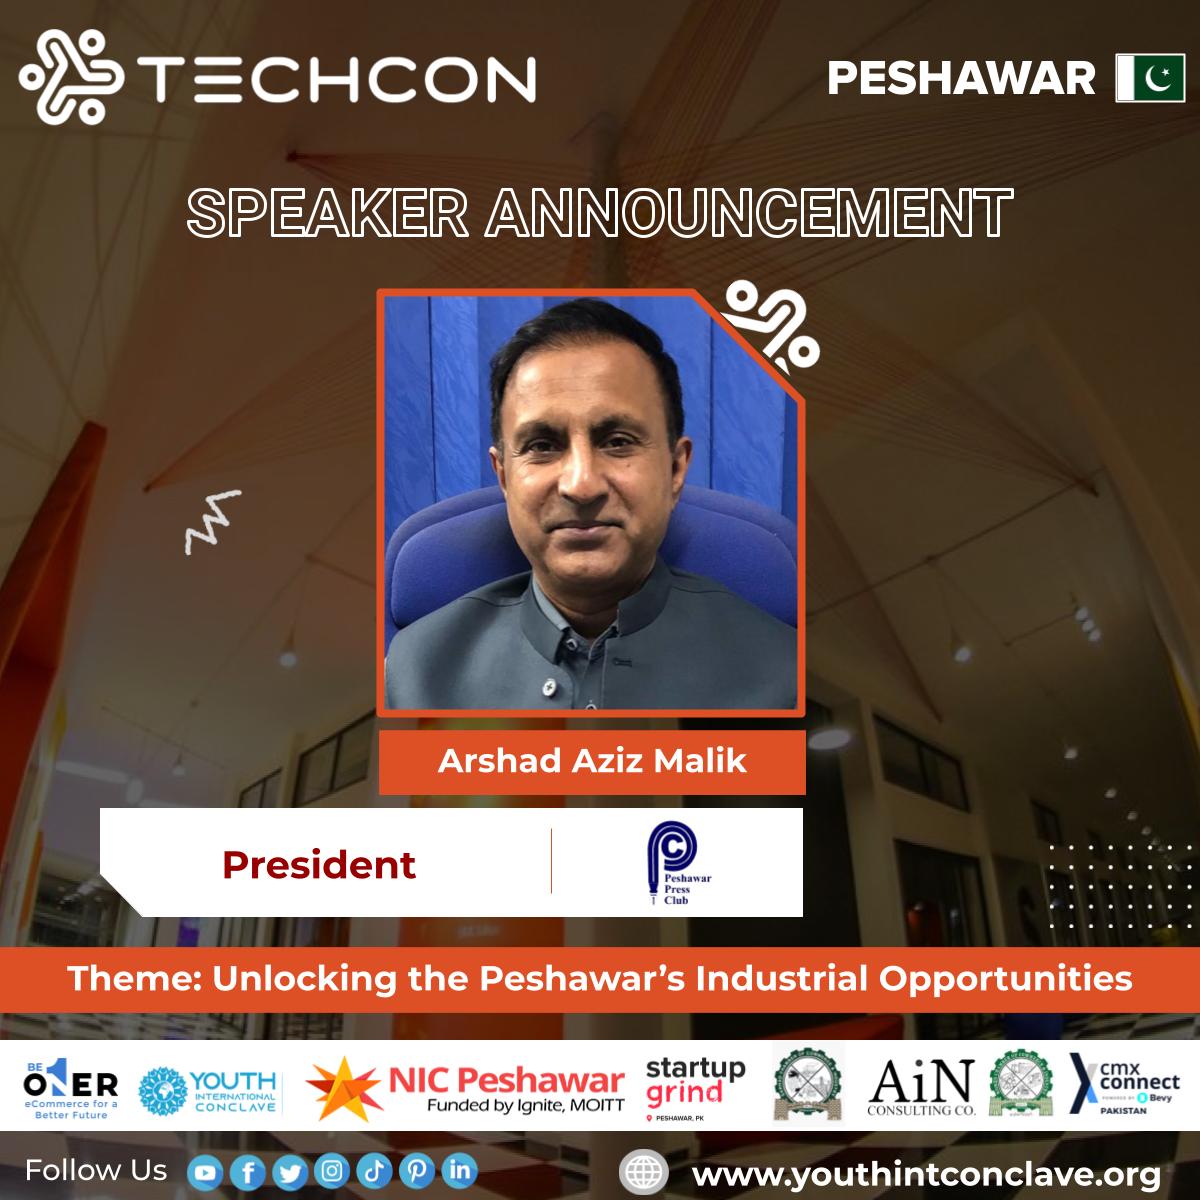 "TechConnect Peshawar event's speaker addressing the audience, sharing insights on innovation and technology